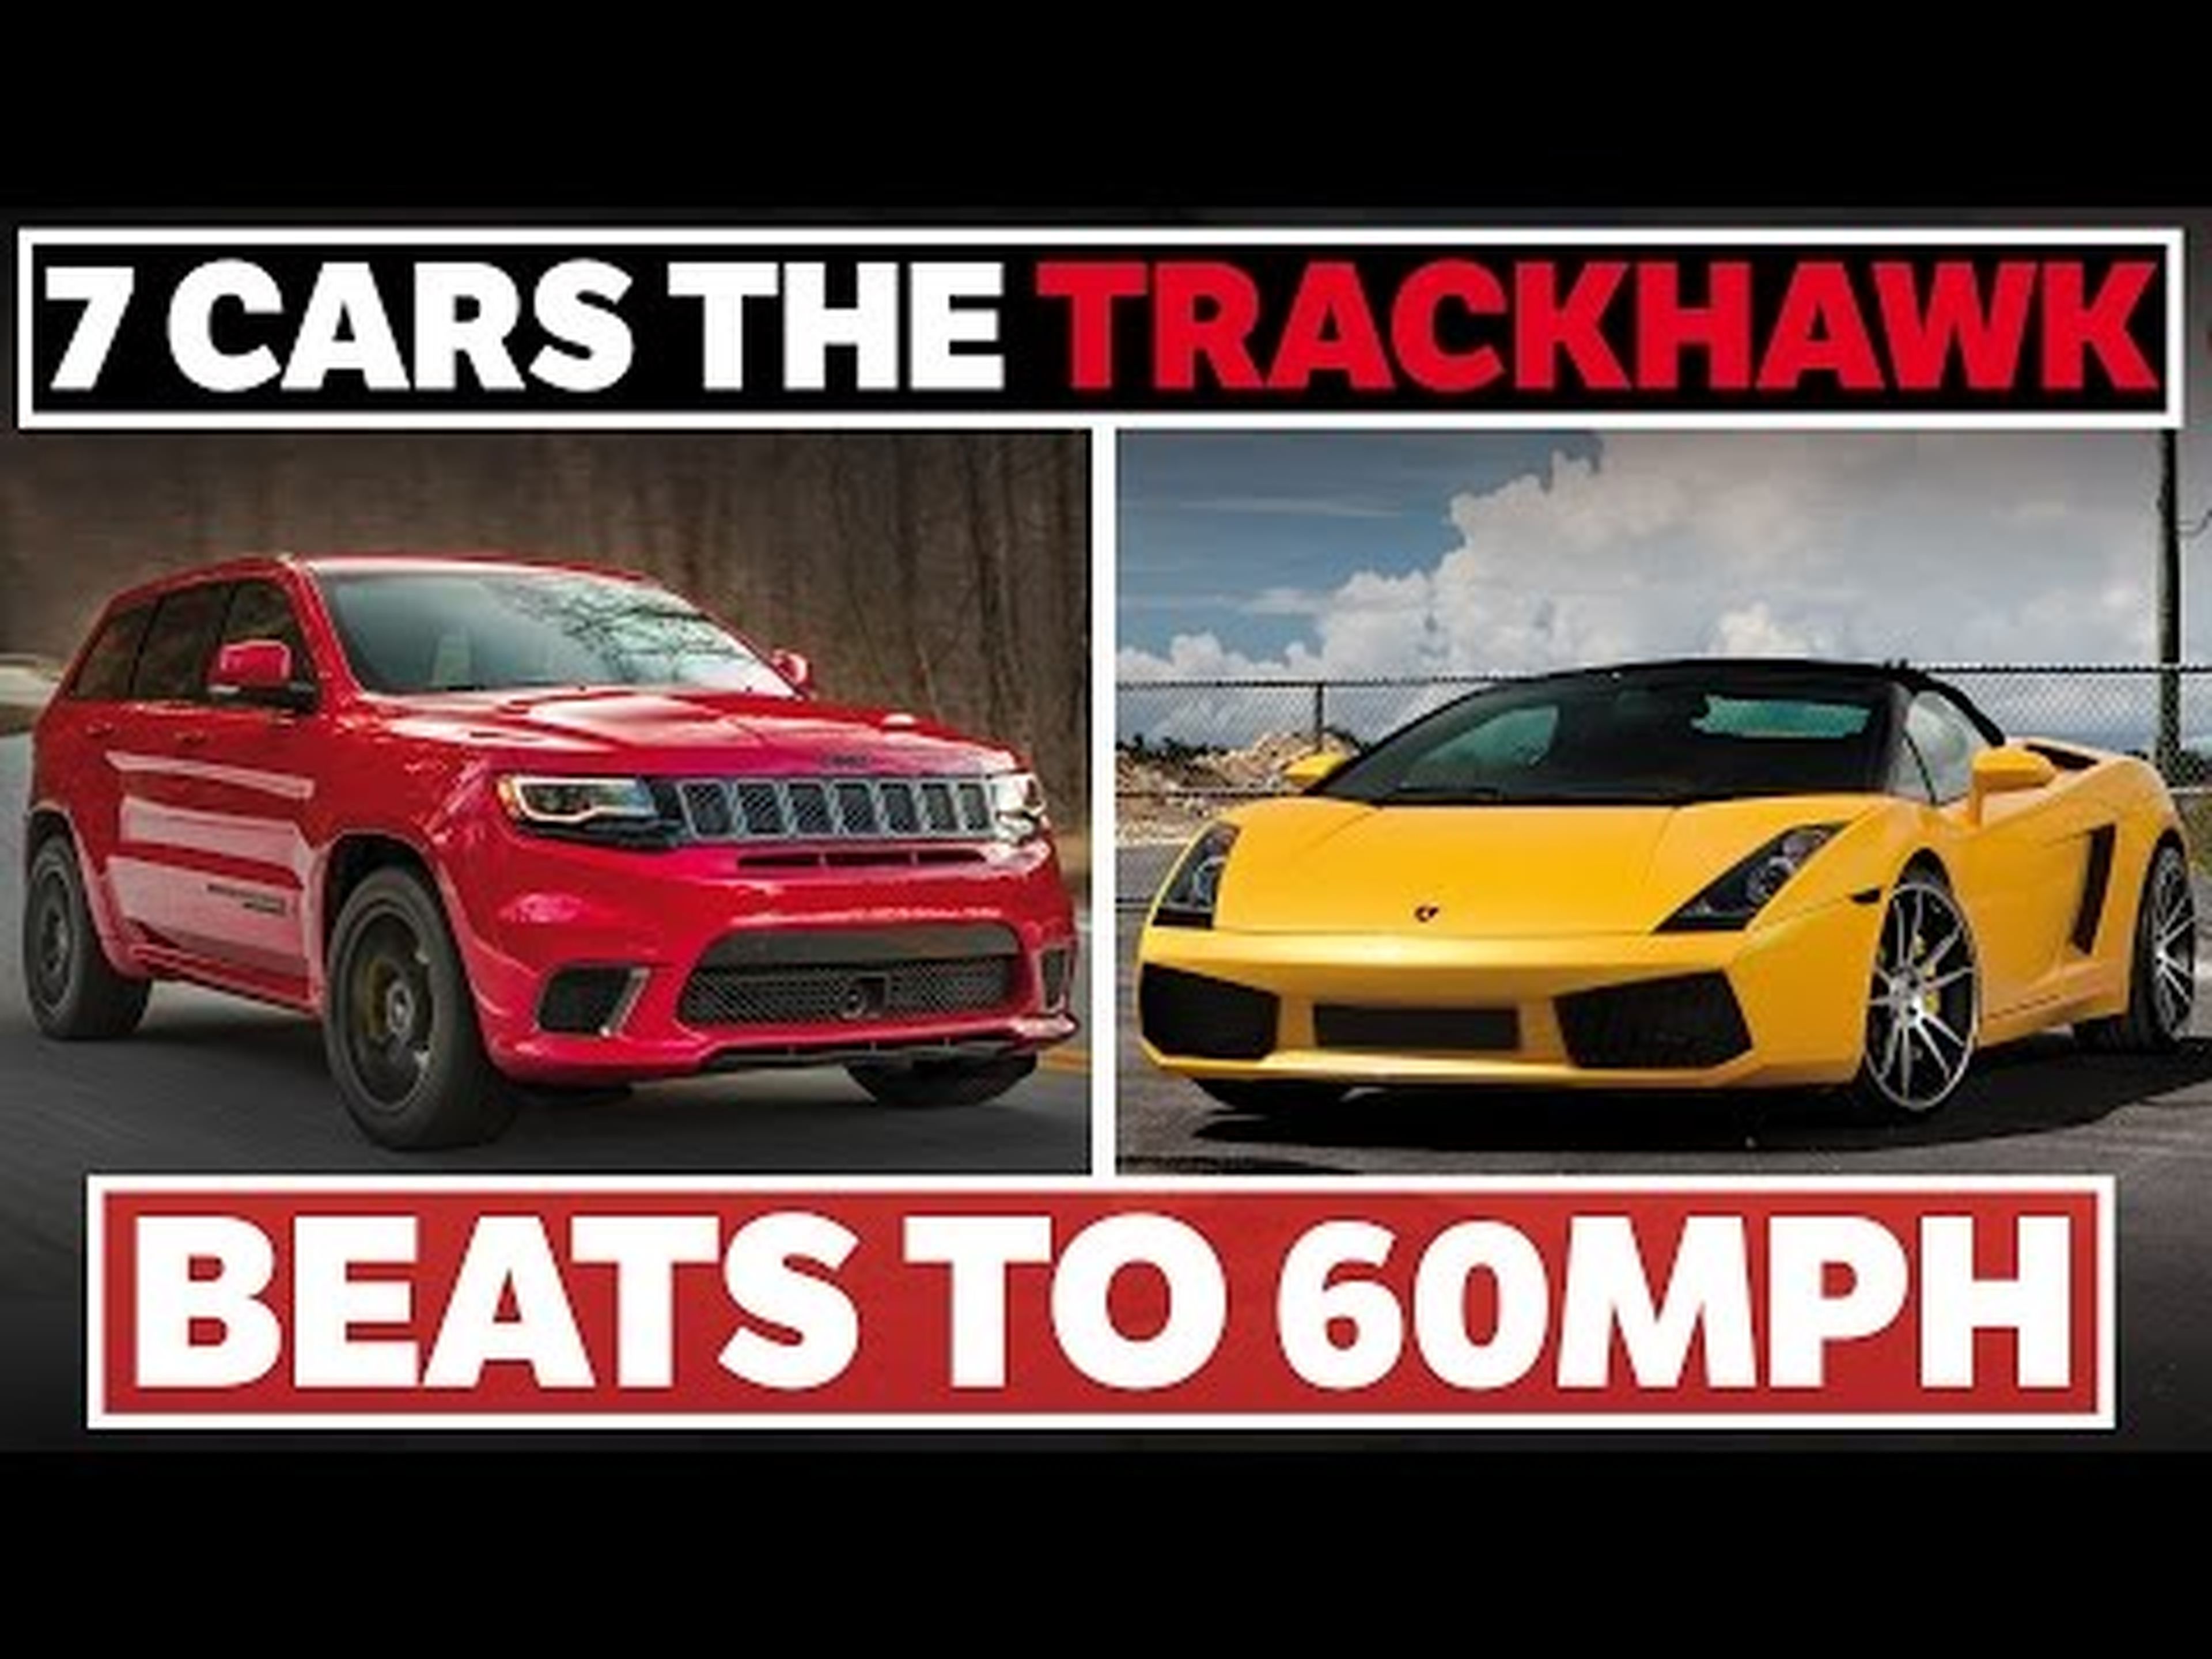 7 Cars The Jeep Grand Cherokee Trackhawk Can Beat To 60mph